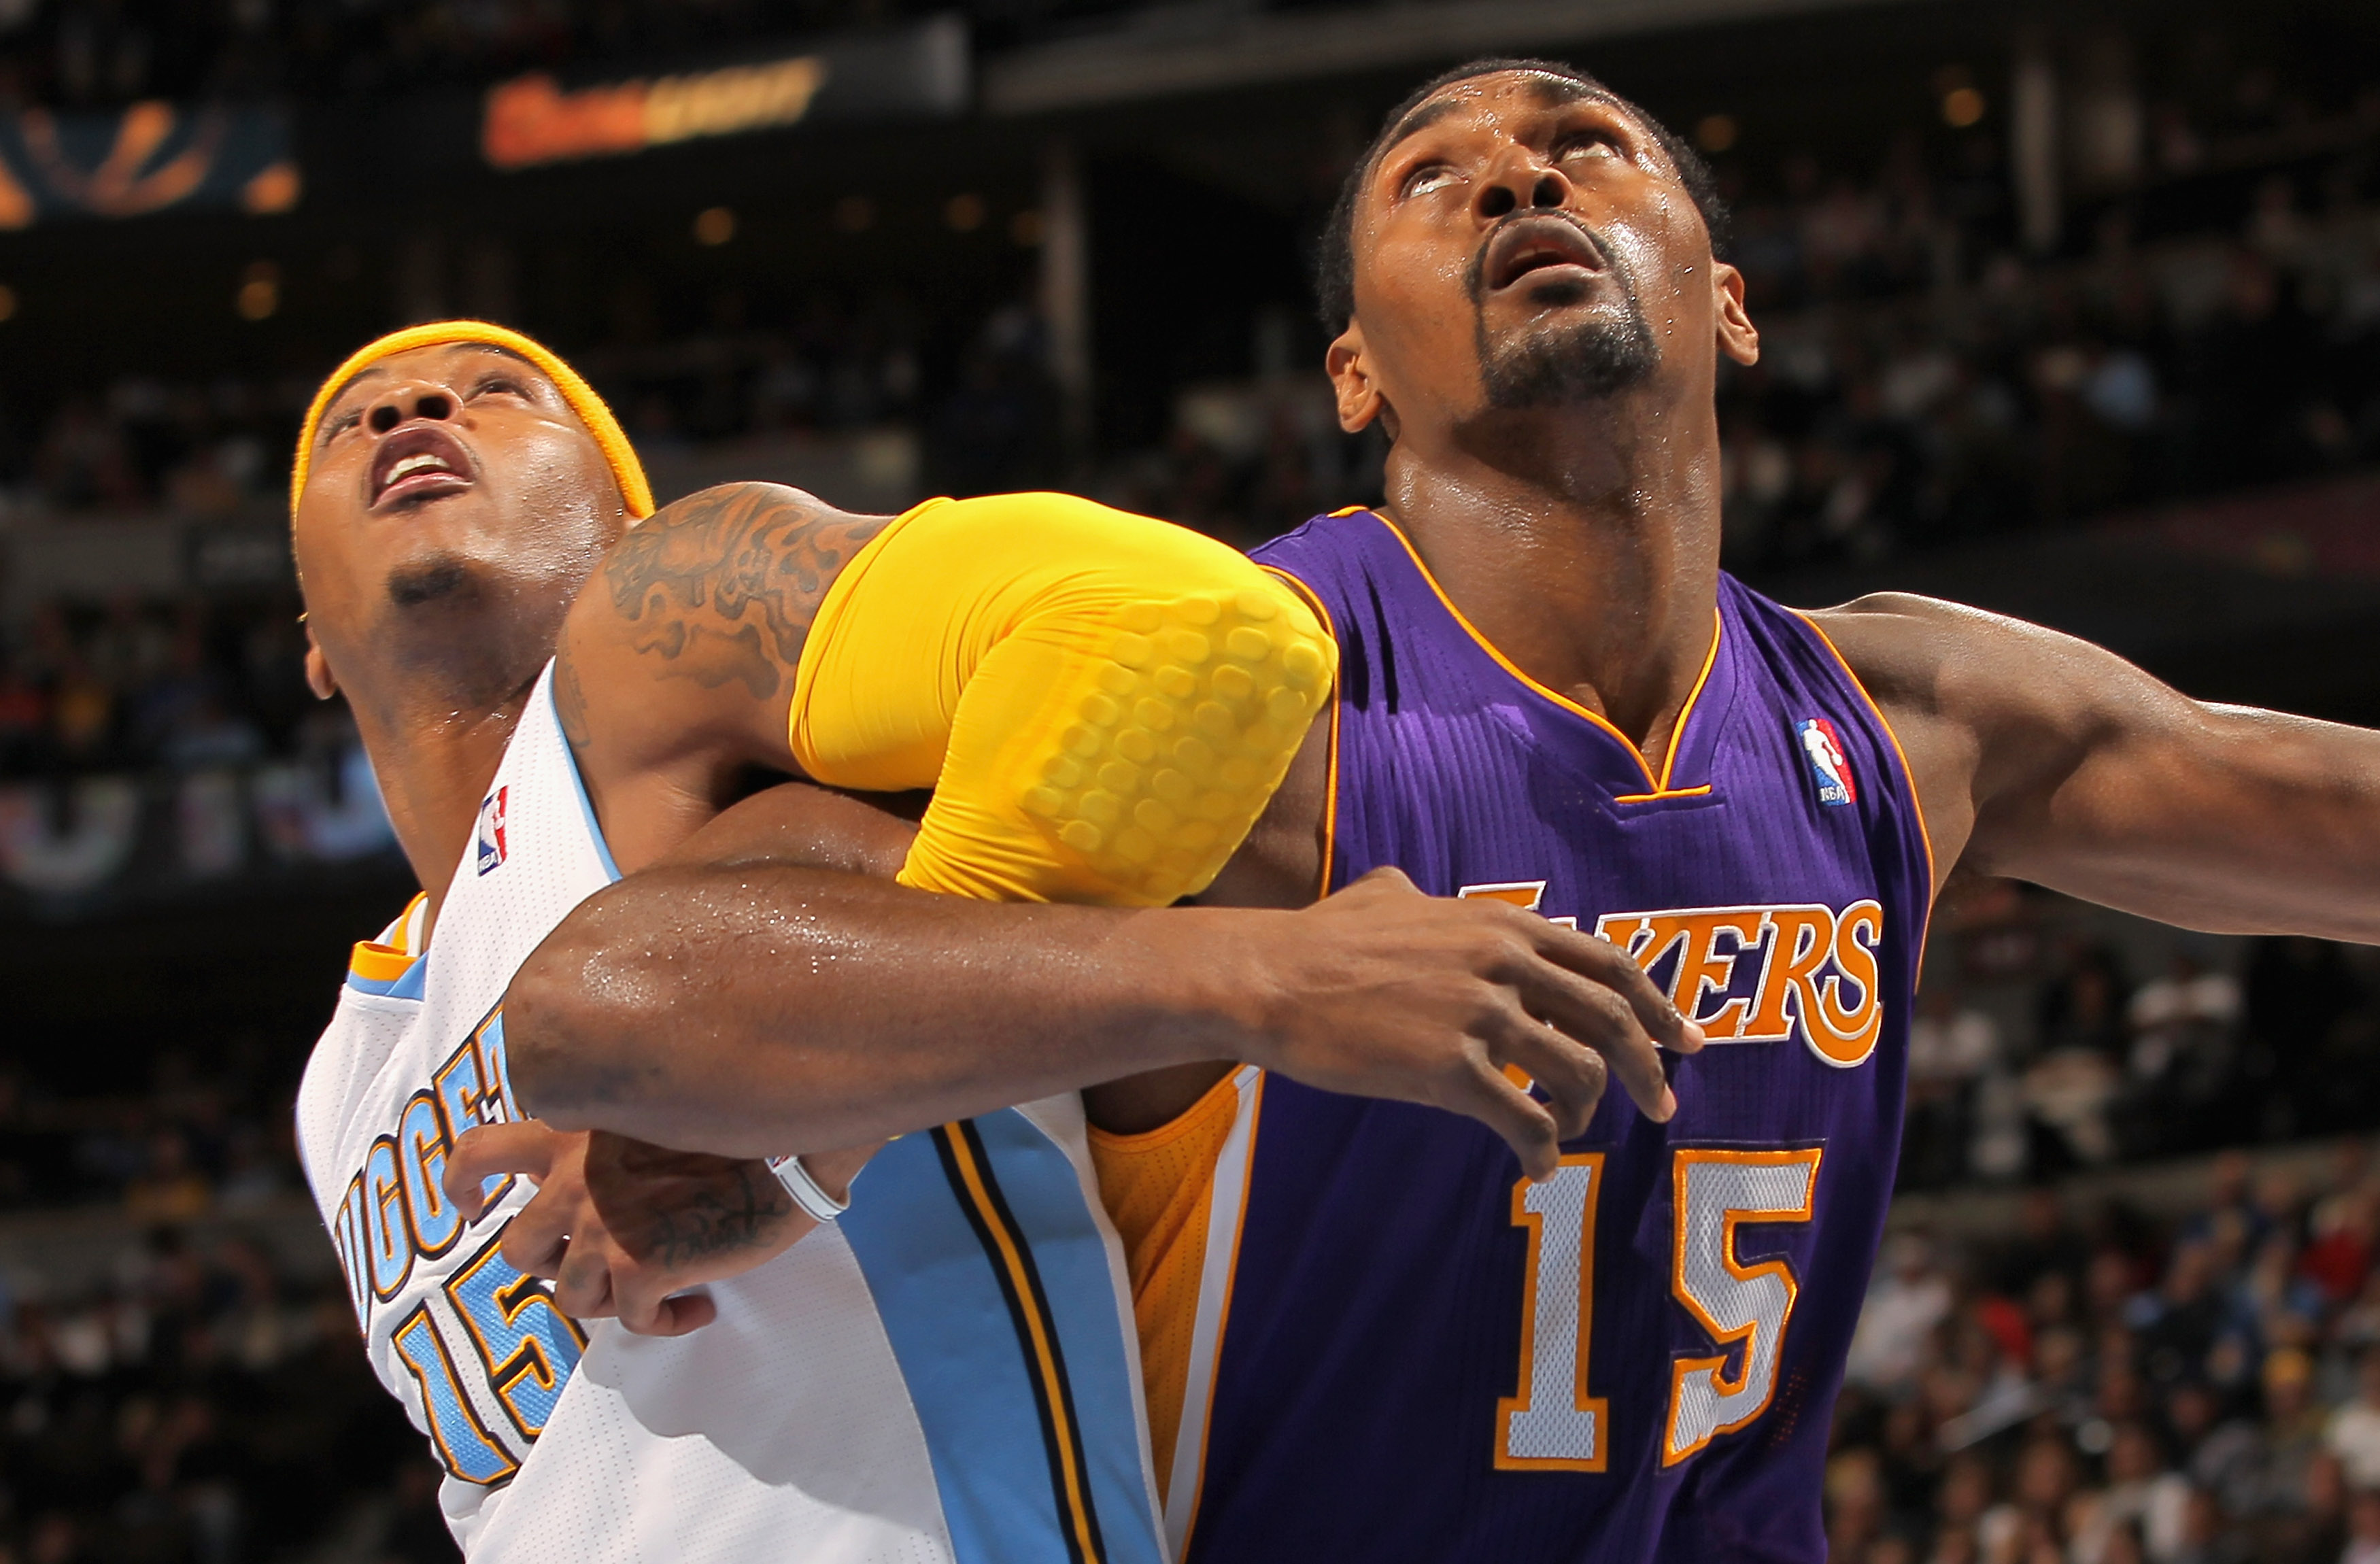 DENVER - NOVEMBER 11:  Ron Artest #15 of the Los Angeles Lakers battles for position with Carmelo Anthony #15 of the Denver Nuggets at the Pepsi Center on November 11, 2010 in Denver, Colorado. The Nuggets defeated the Lakers 118-112.  NOTE TO USER: User